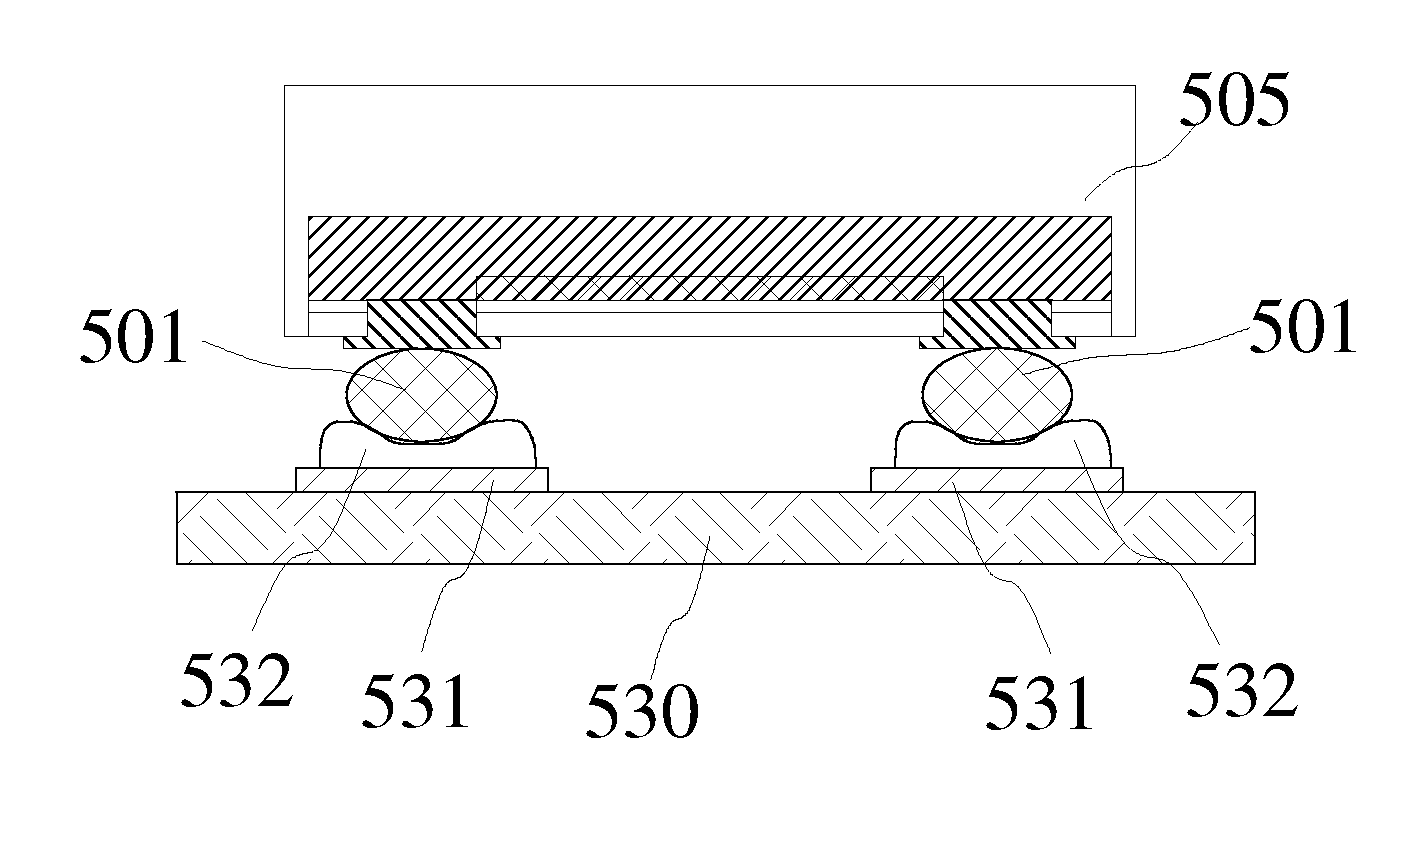 Area reduction for surface mount package chips